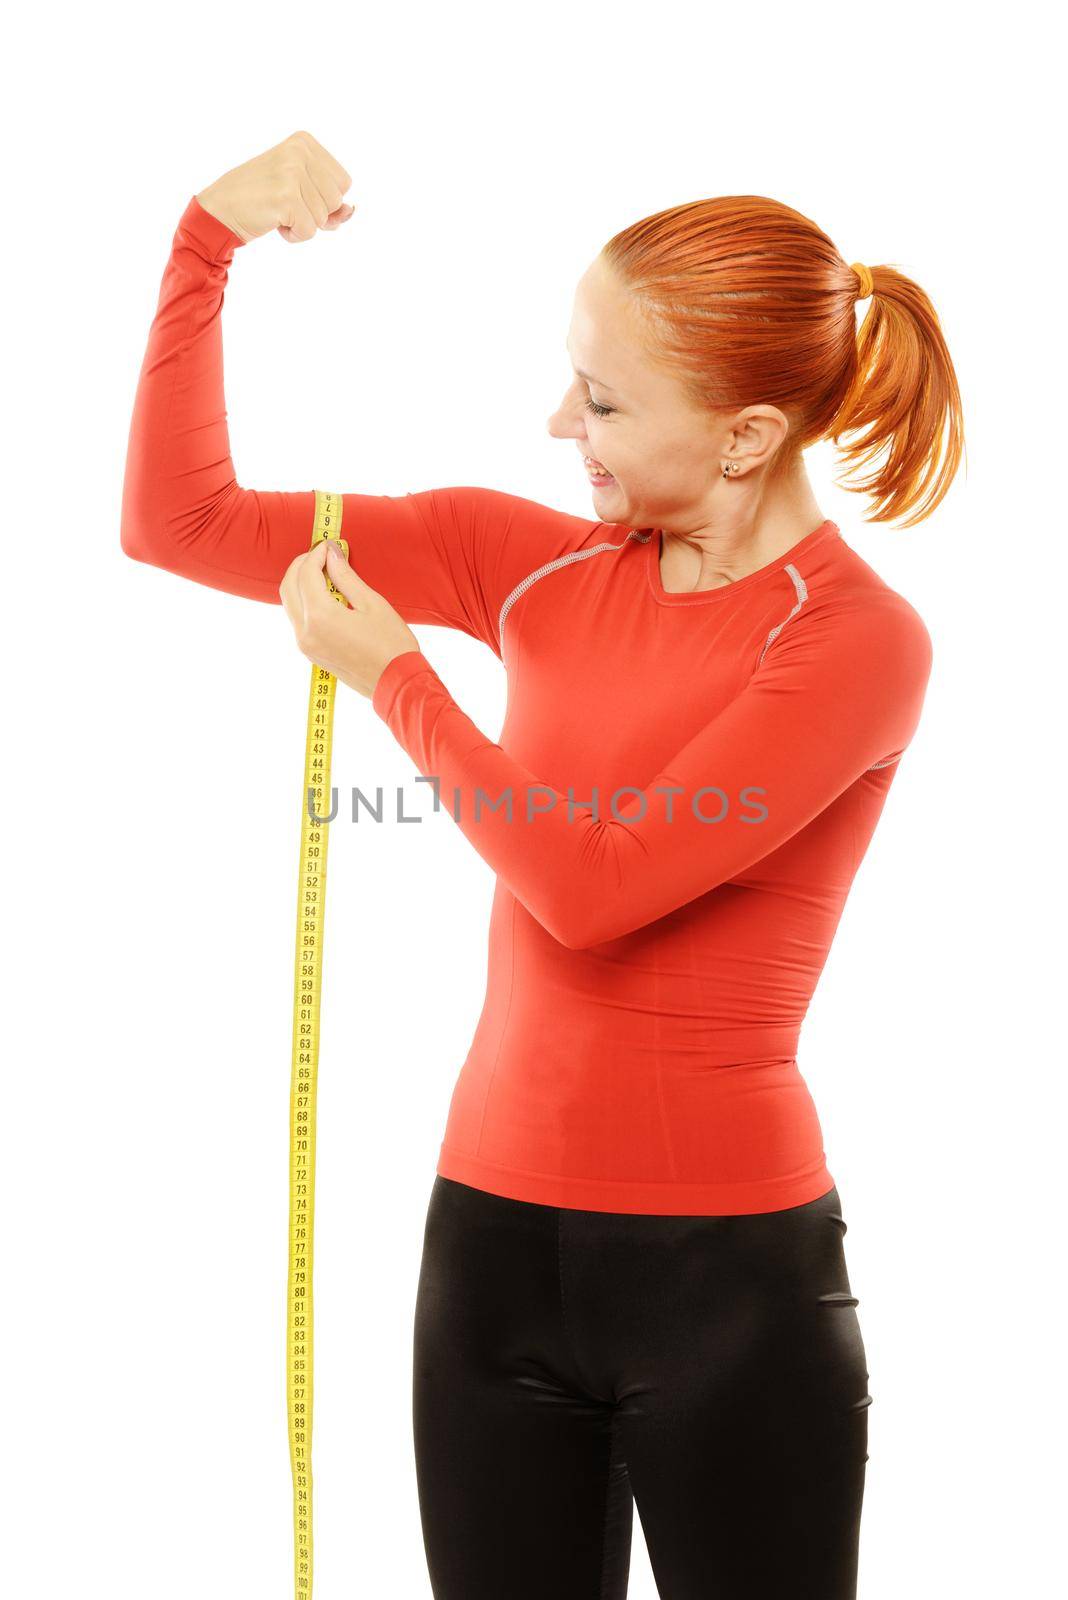 Beautiful slim red fit woman holding measuring tape to her bicep over white background